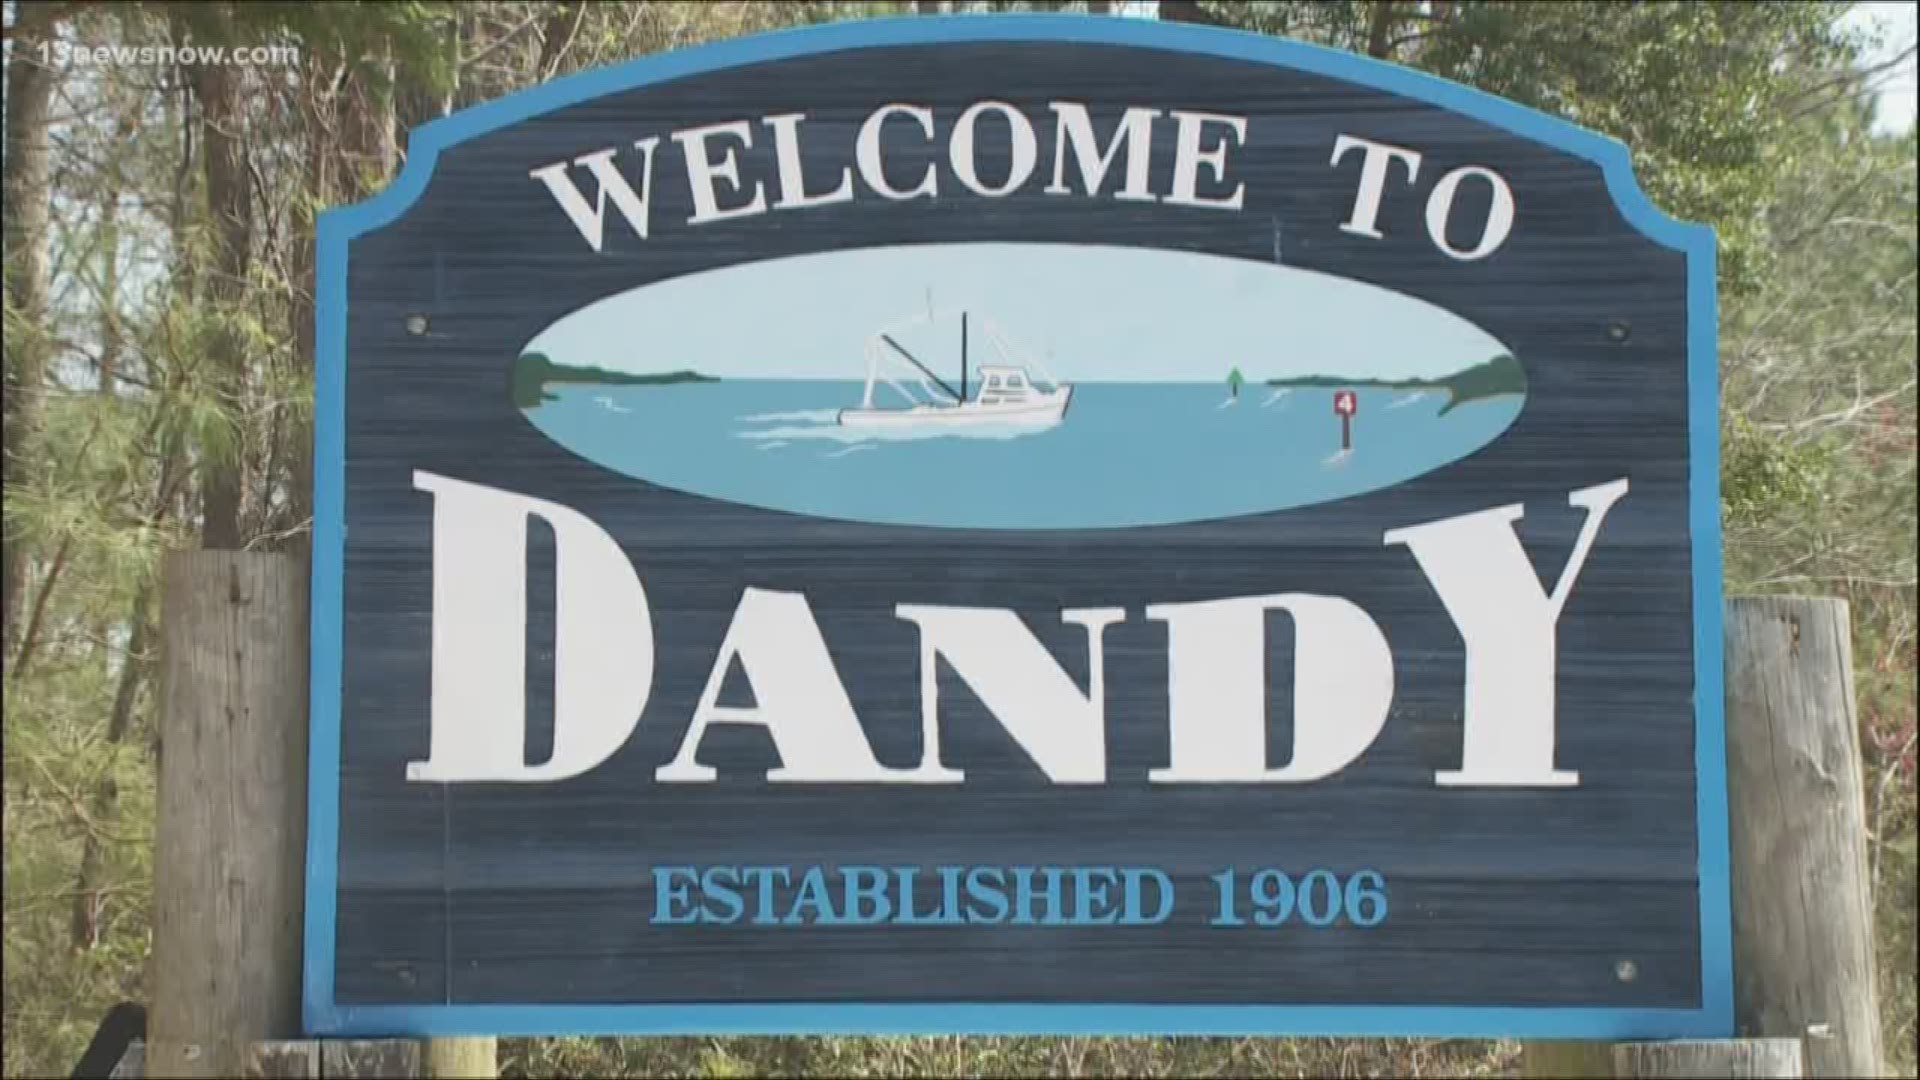 Residents of the Dandy area are concerned about a Peeping Tom. The community is banding together to help catch the culprit.